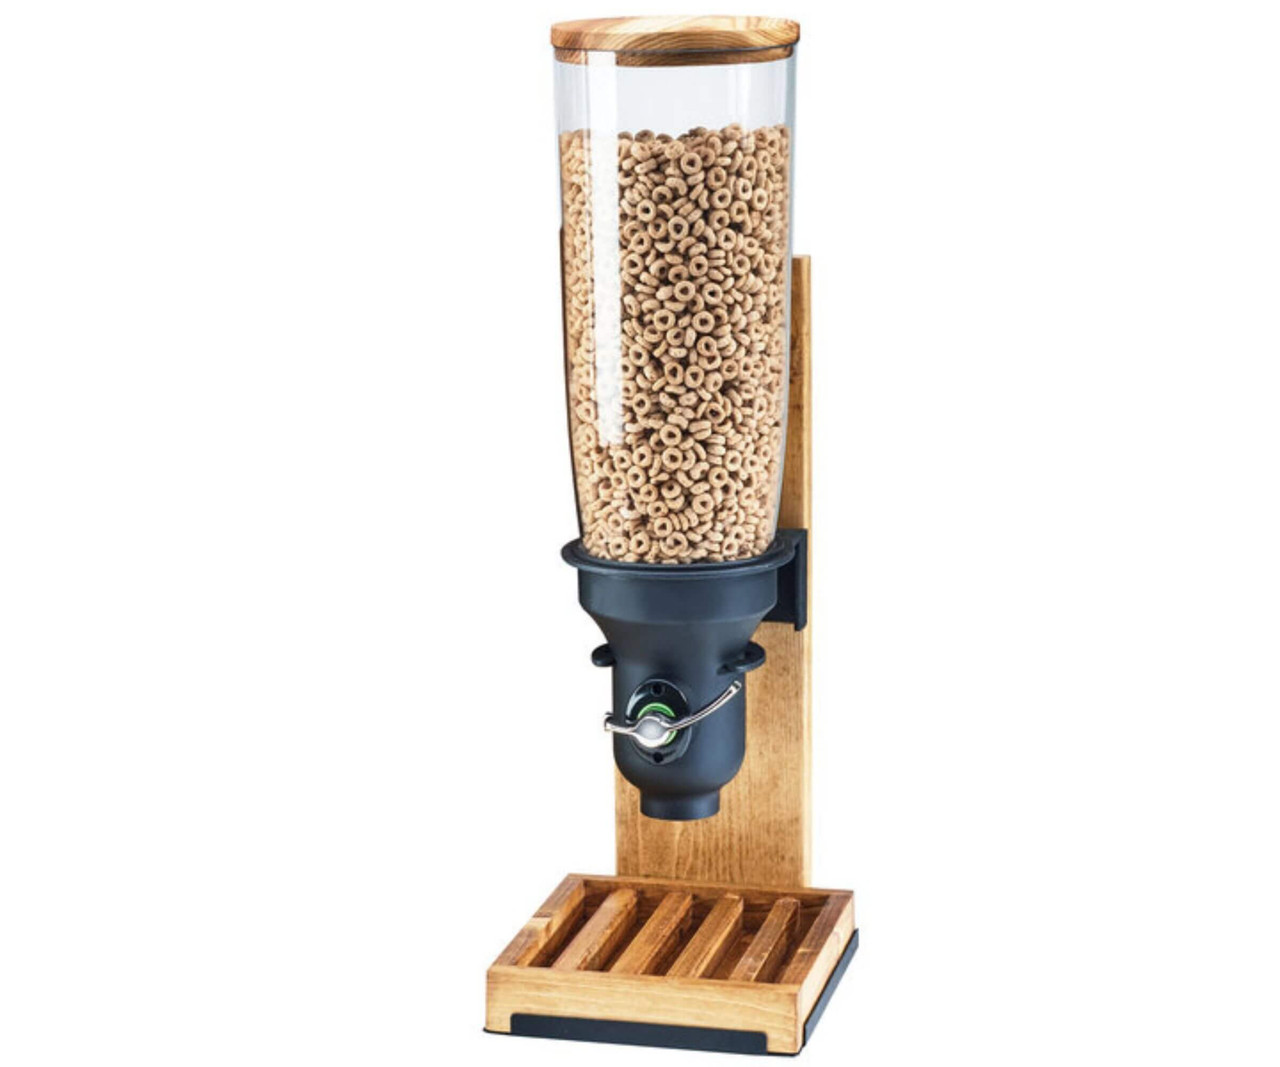 Cal-Mil Madera 5 Liter Single Canister Free Flow Cereal Dispenser - Rustic Elegance for Hassle-Free Service